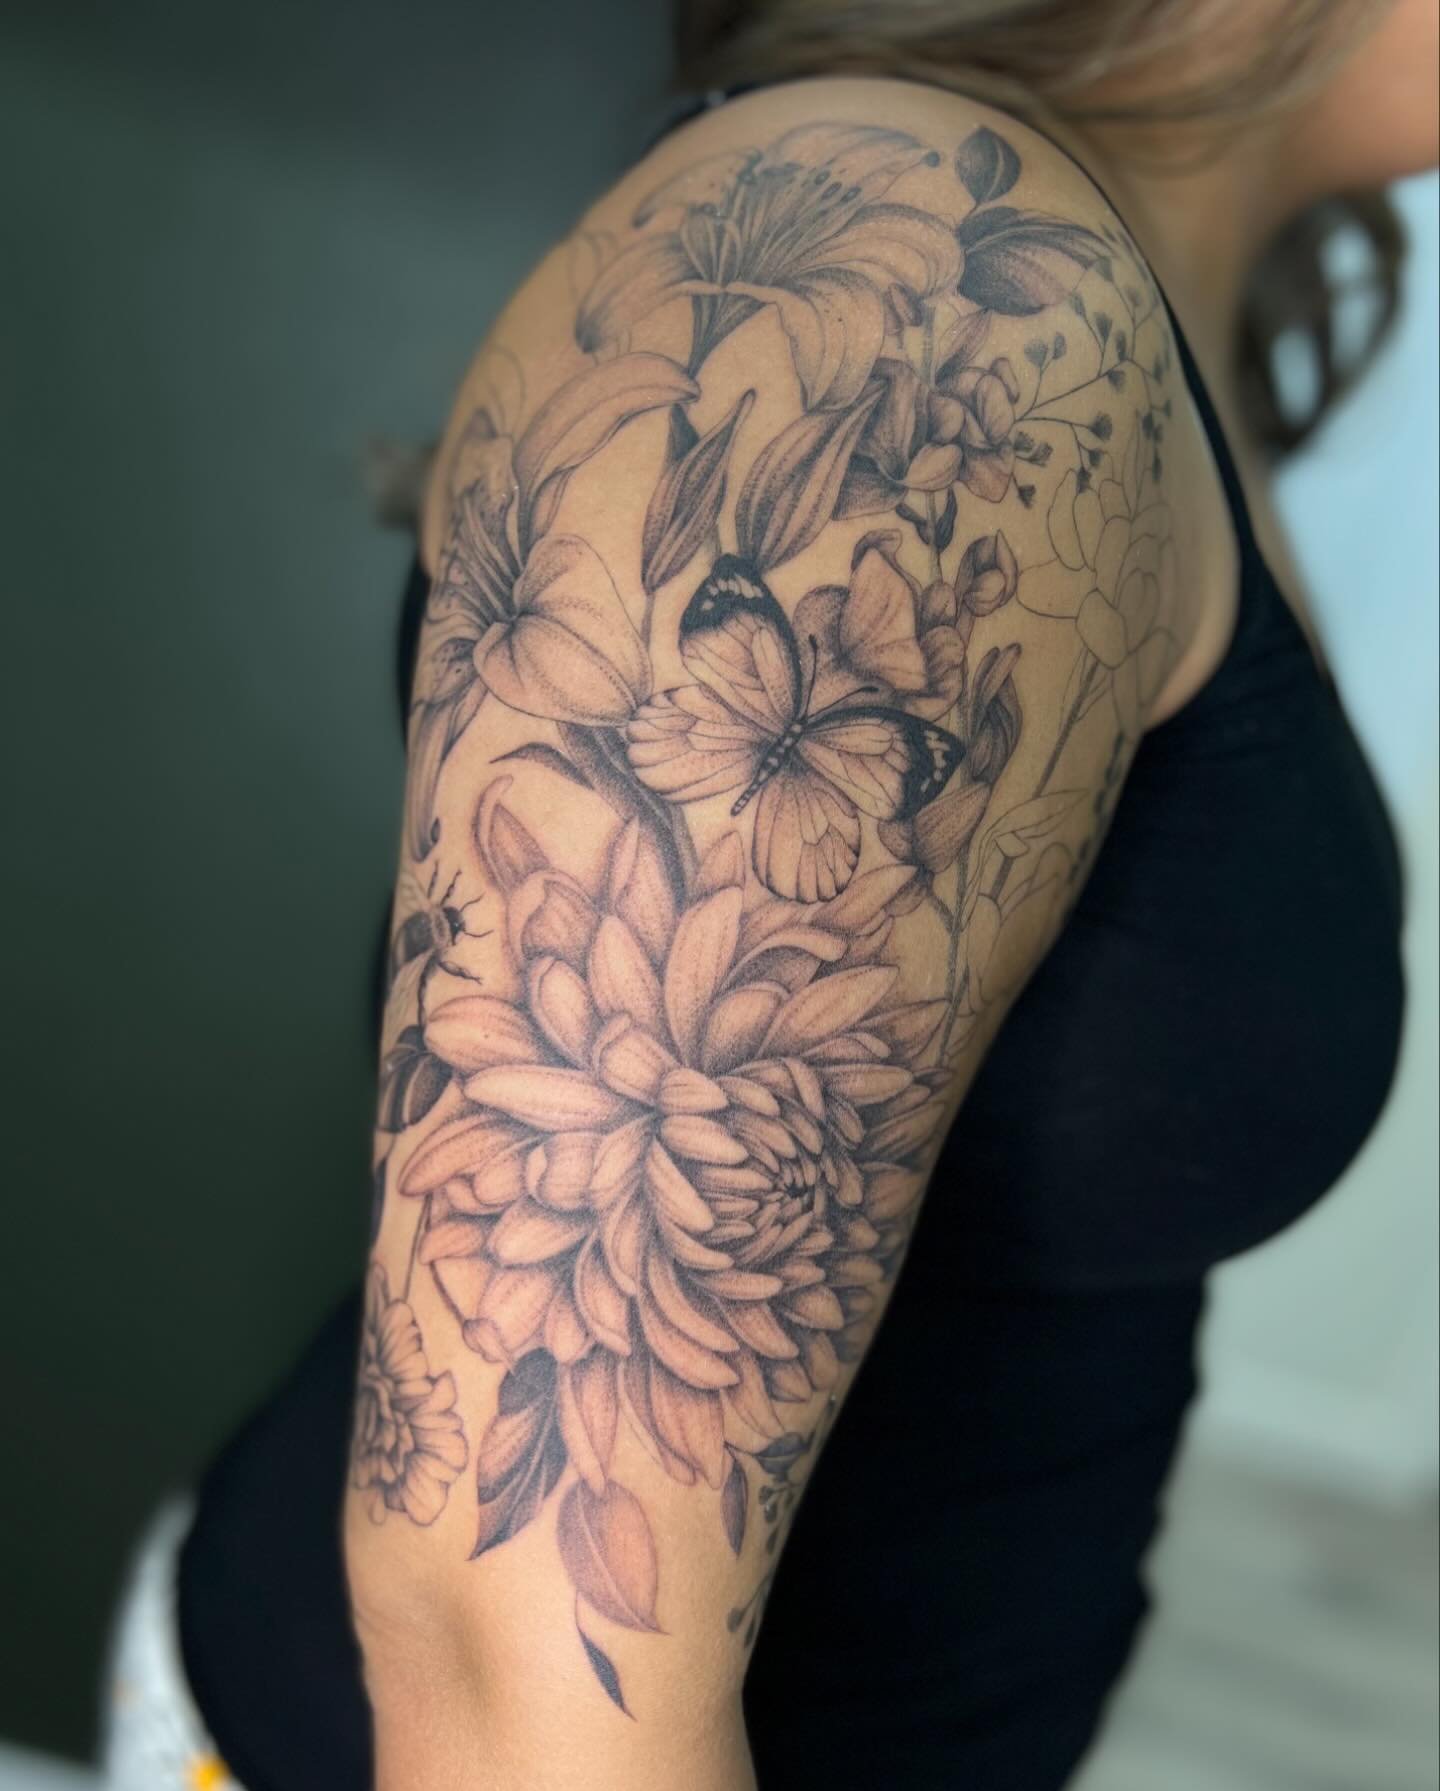 We&rsquo;re about half way done with this upper half sleeve made up of the birth flowers of my client and her family. I&rsquo;m seriously so excited to get back to this piece and see the finished product! 🖤

My love for large floral projects has rea